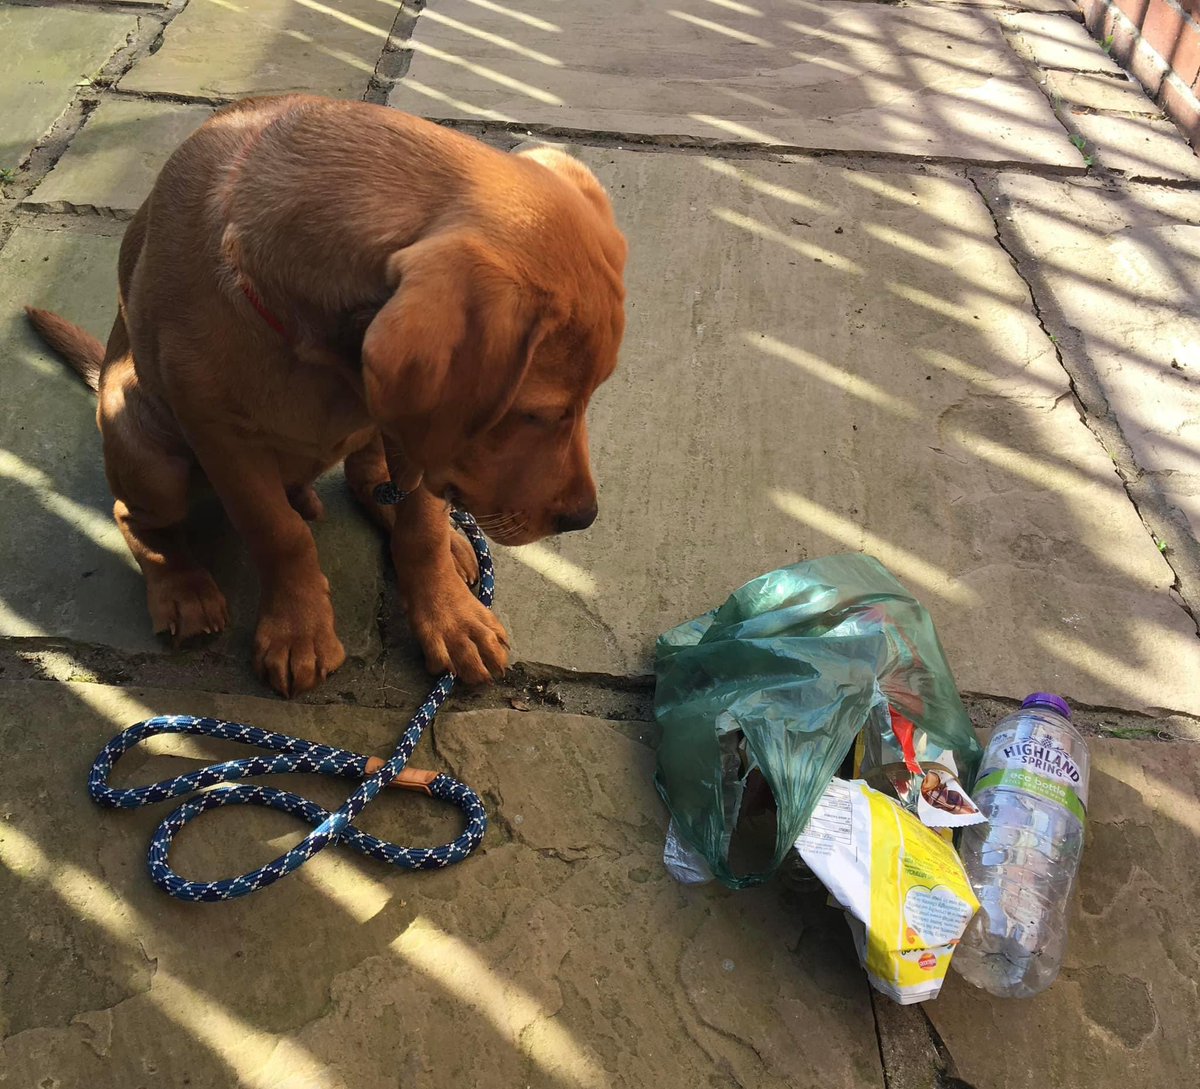 Happy Monday - Let’s get out & make a difference! A couple of pieces of #litter on every walk, every day. So simple, so AMAZINGLY effective! Let’s spread the word! Great for #mentalhealth & positivity. 😊💕 #pawsonplastic #MondayMotivation #dogsofx #lovedogs